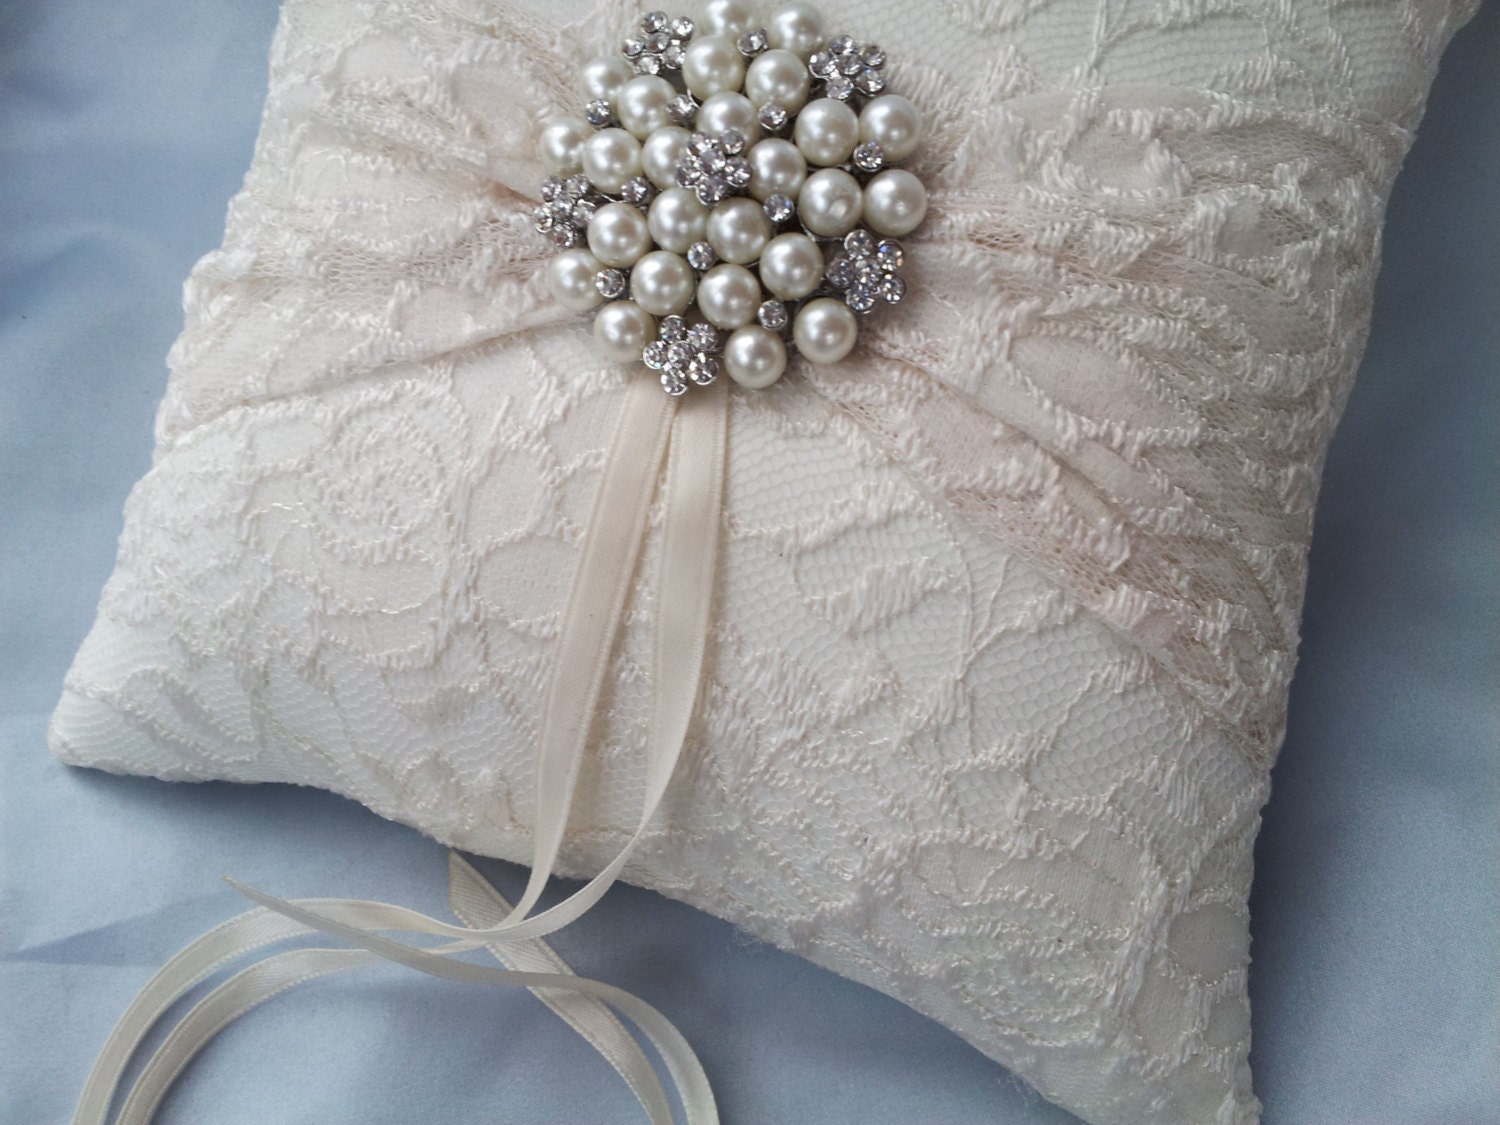 sewing patterns for wedding ring pillows